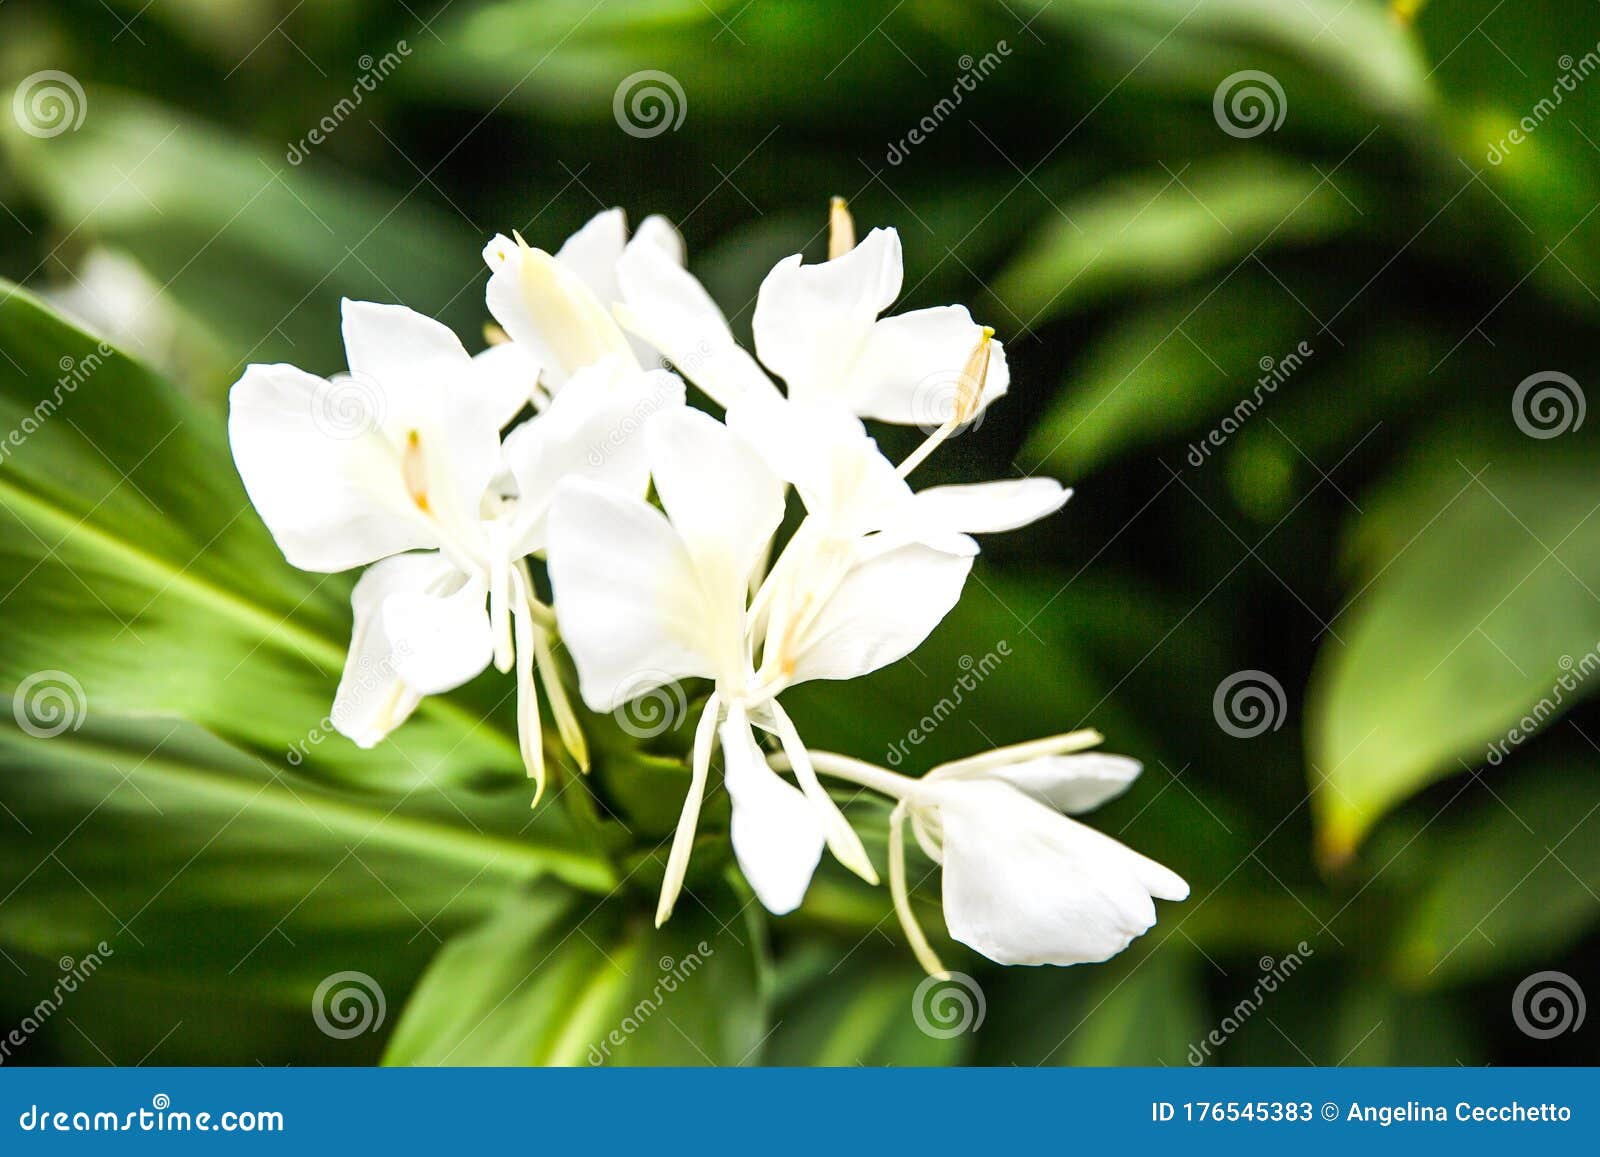 White Garland Lily White Ginger Lily Hedychium Coronarium In Bloom With Green Leaves Stock Image Image Of Garden Hedychium